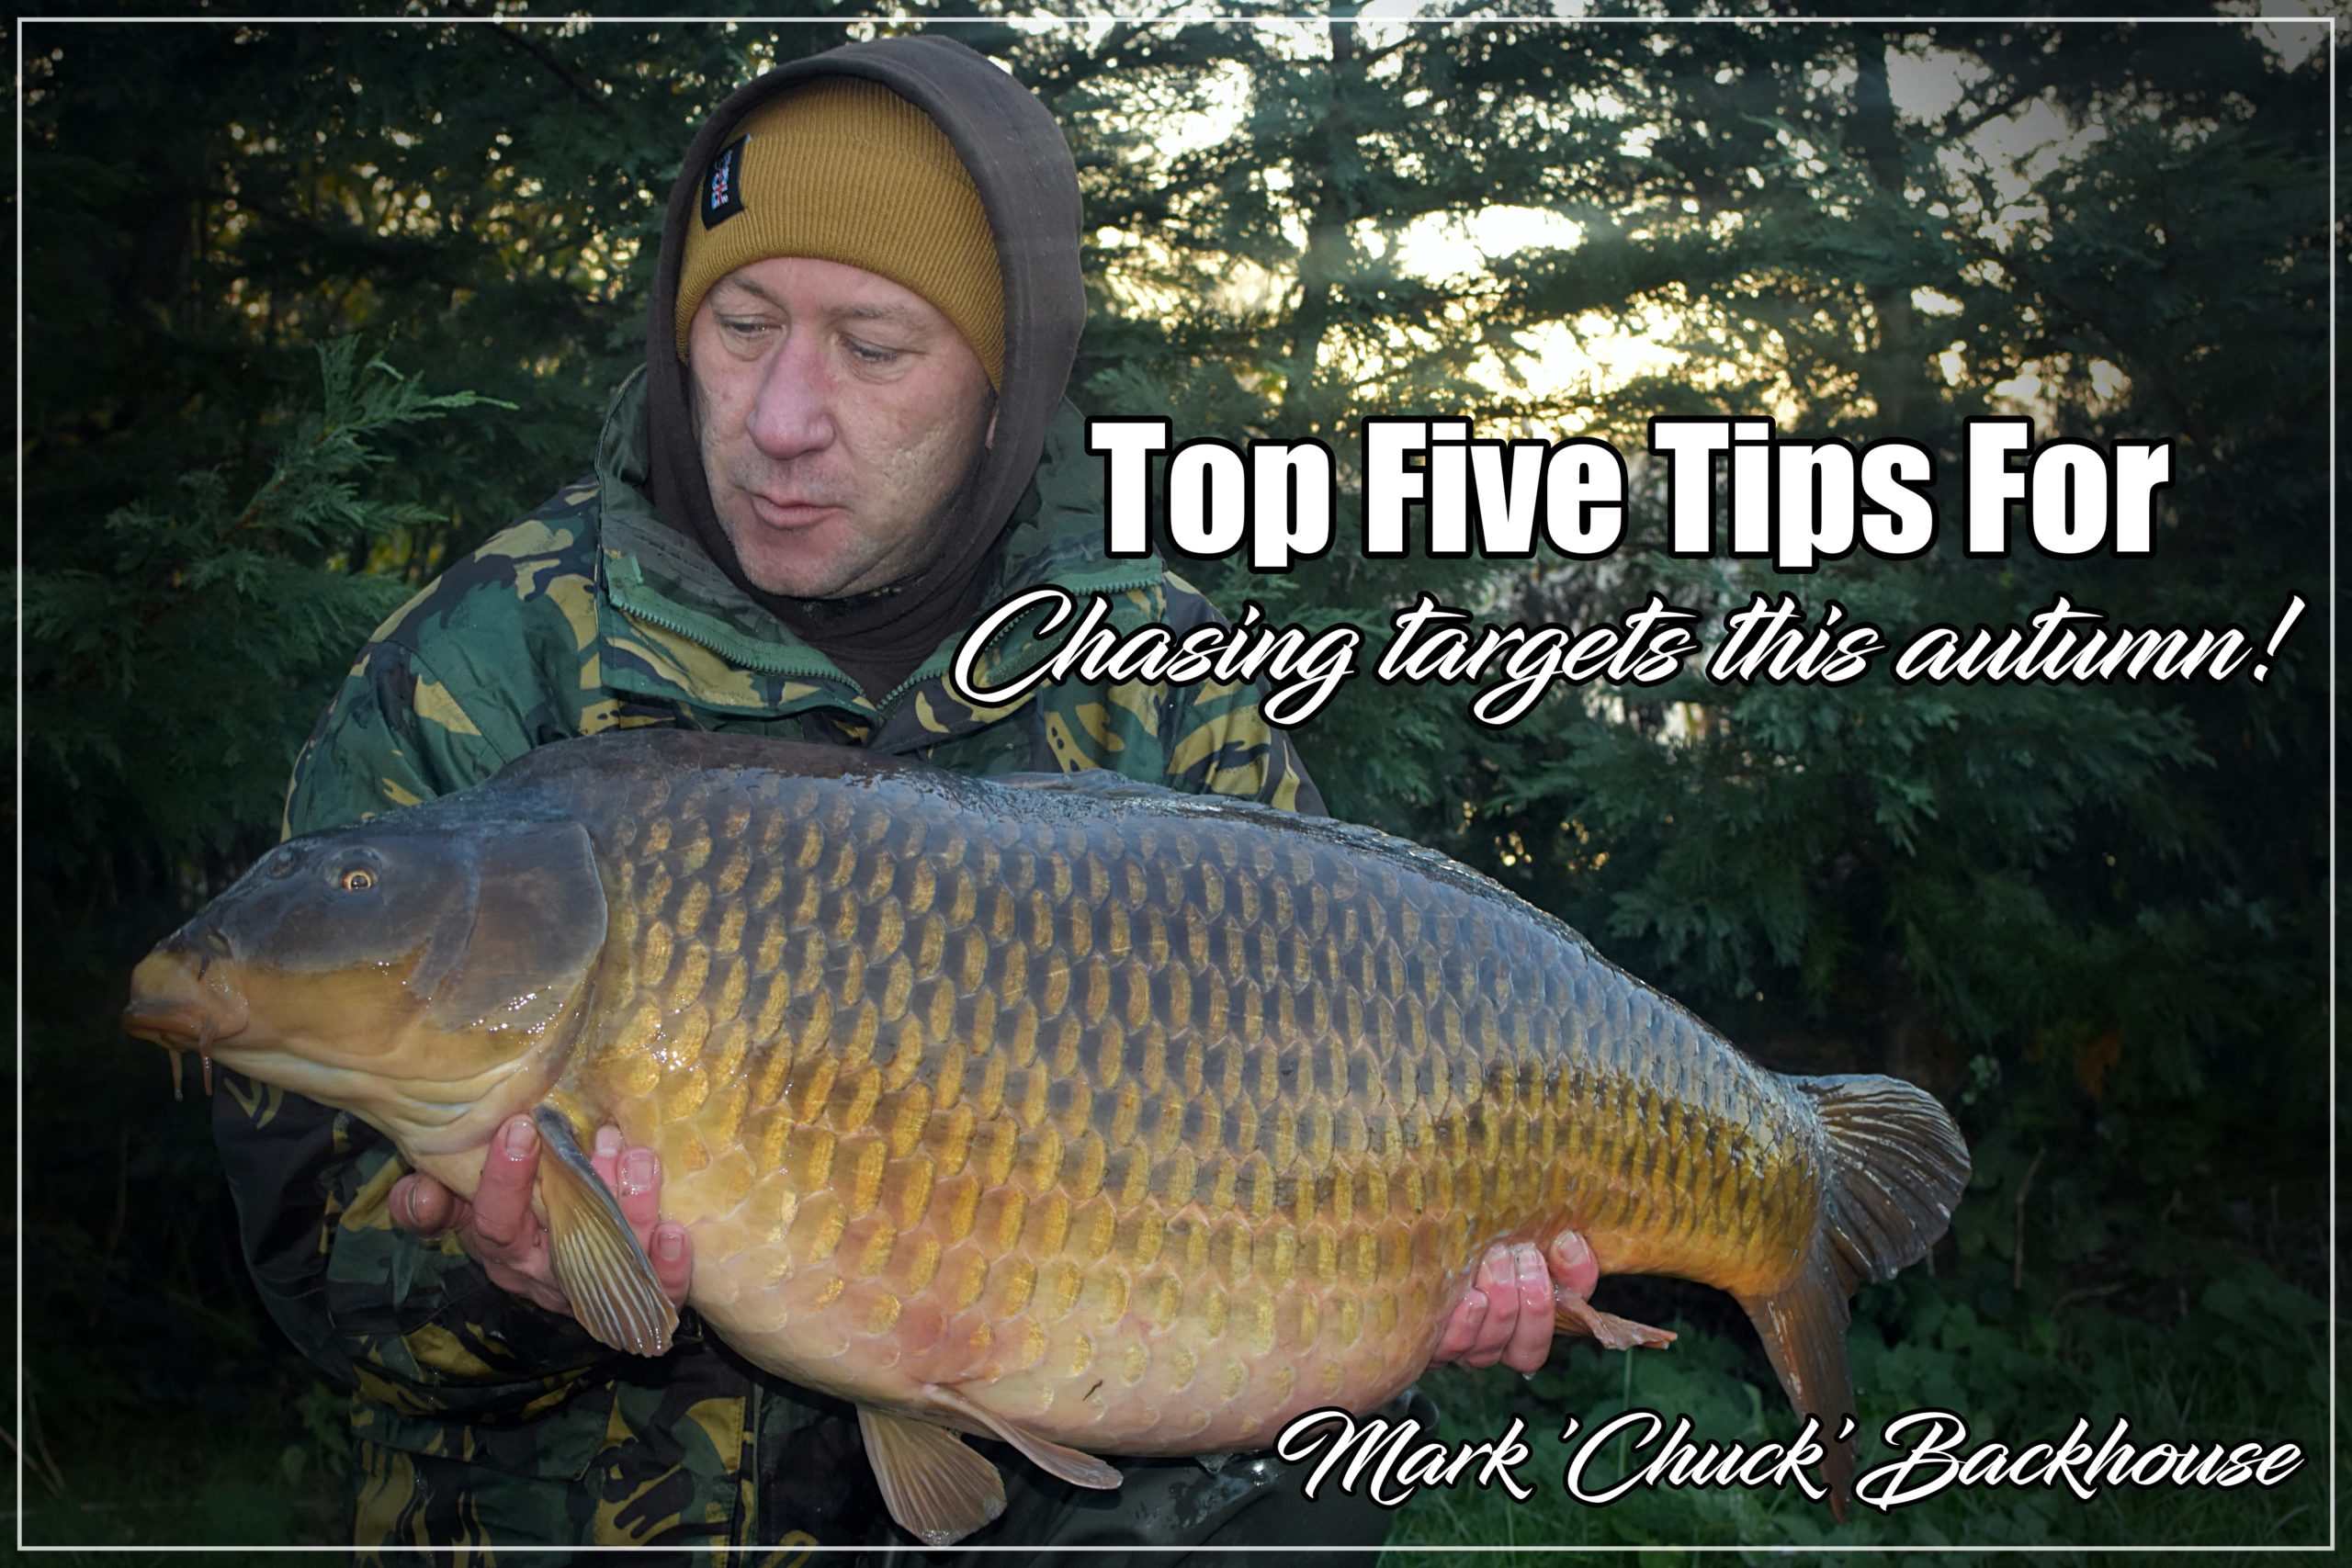 Top five tips for chasing targets this autumn – Mark ‘Chuck’ Backhouse